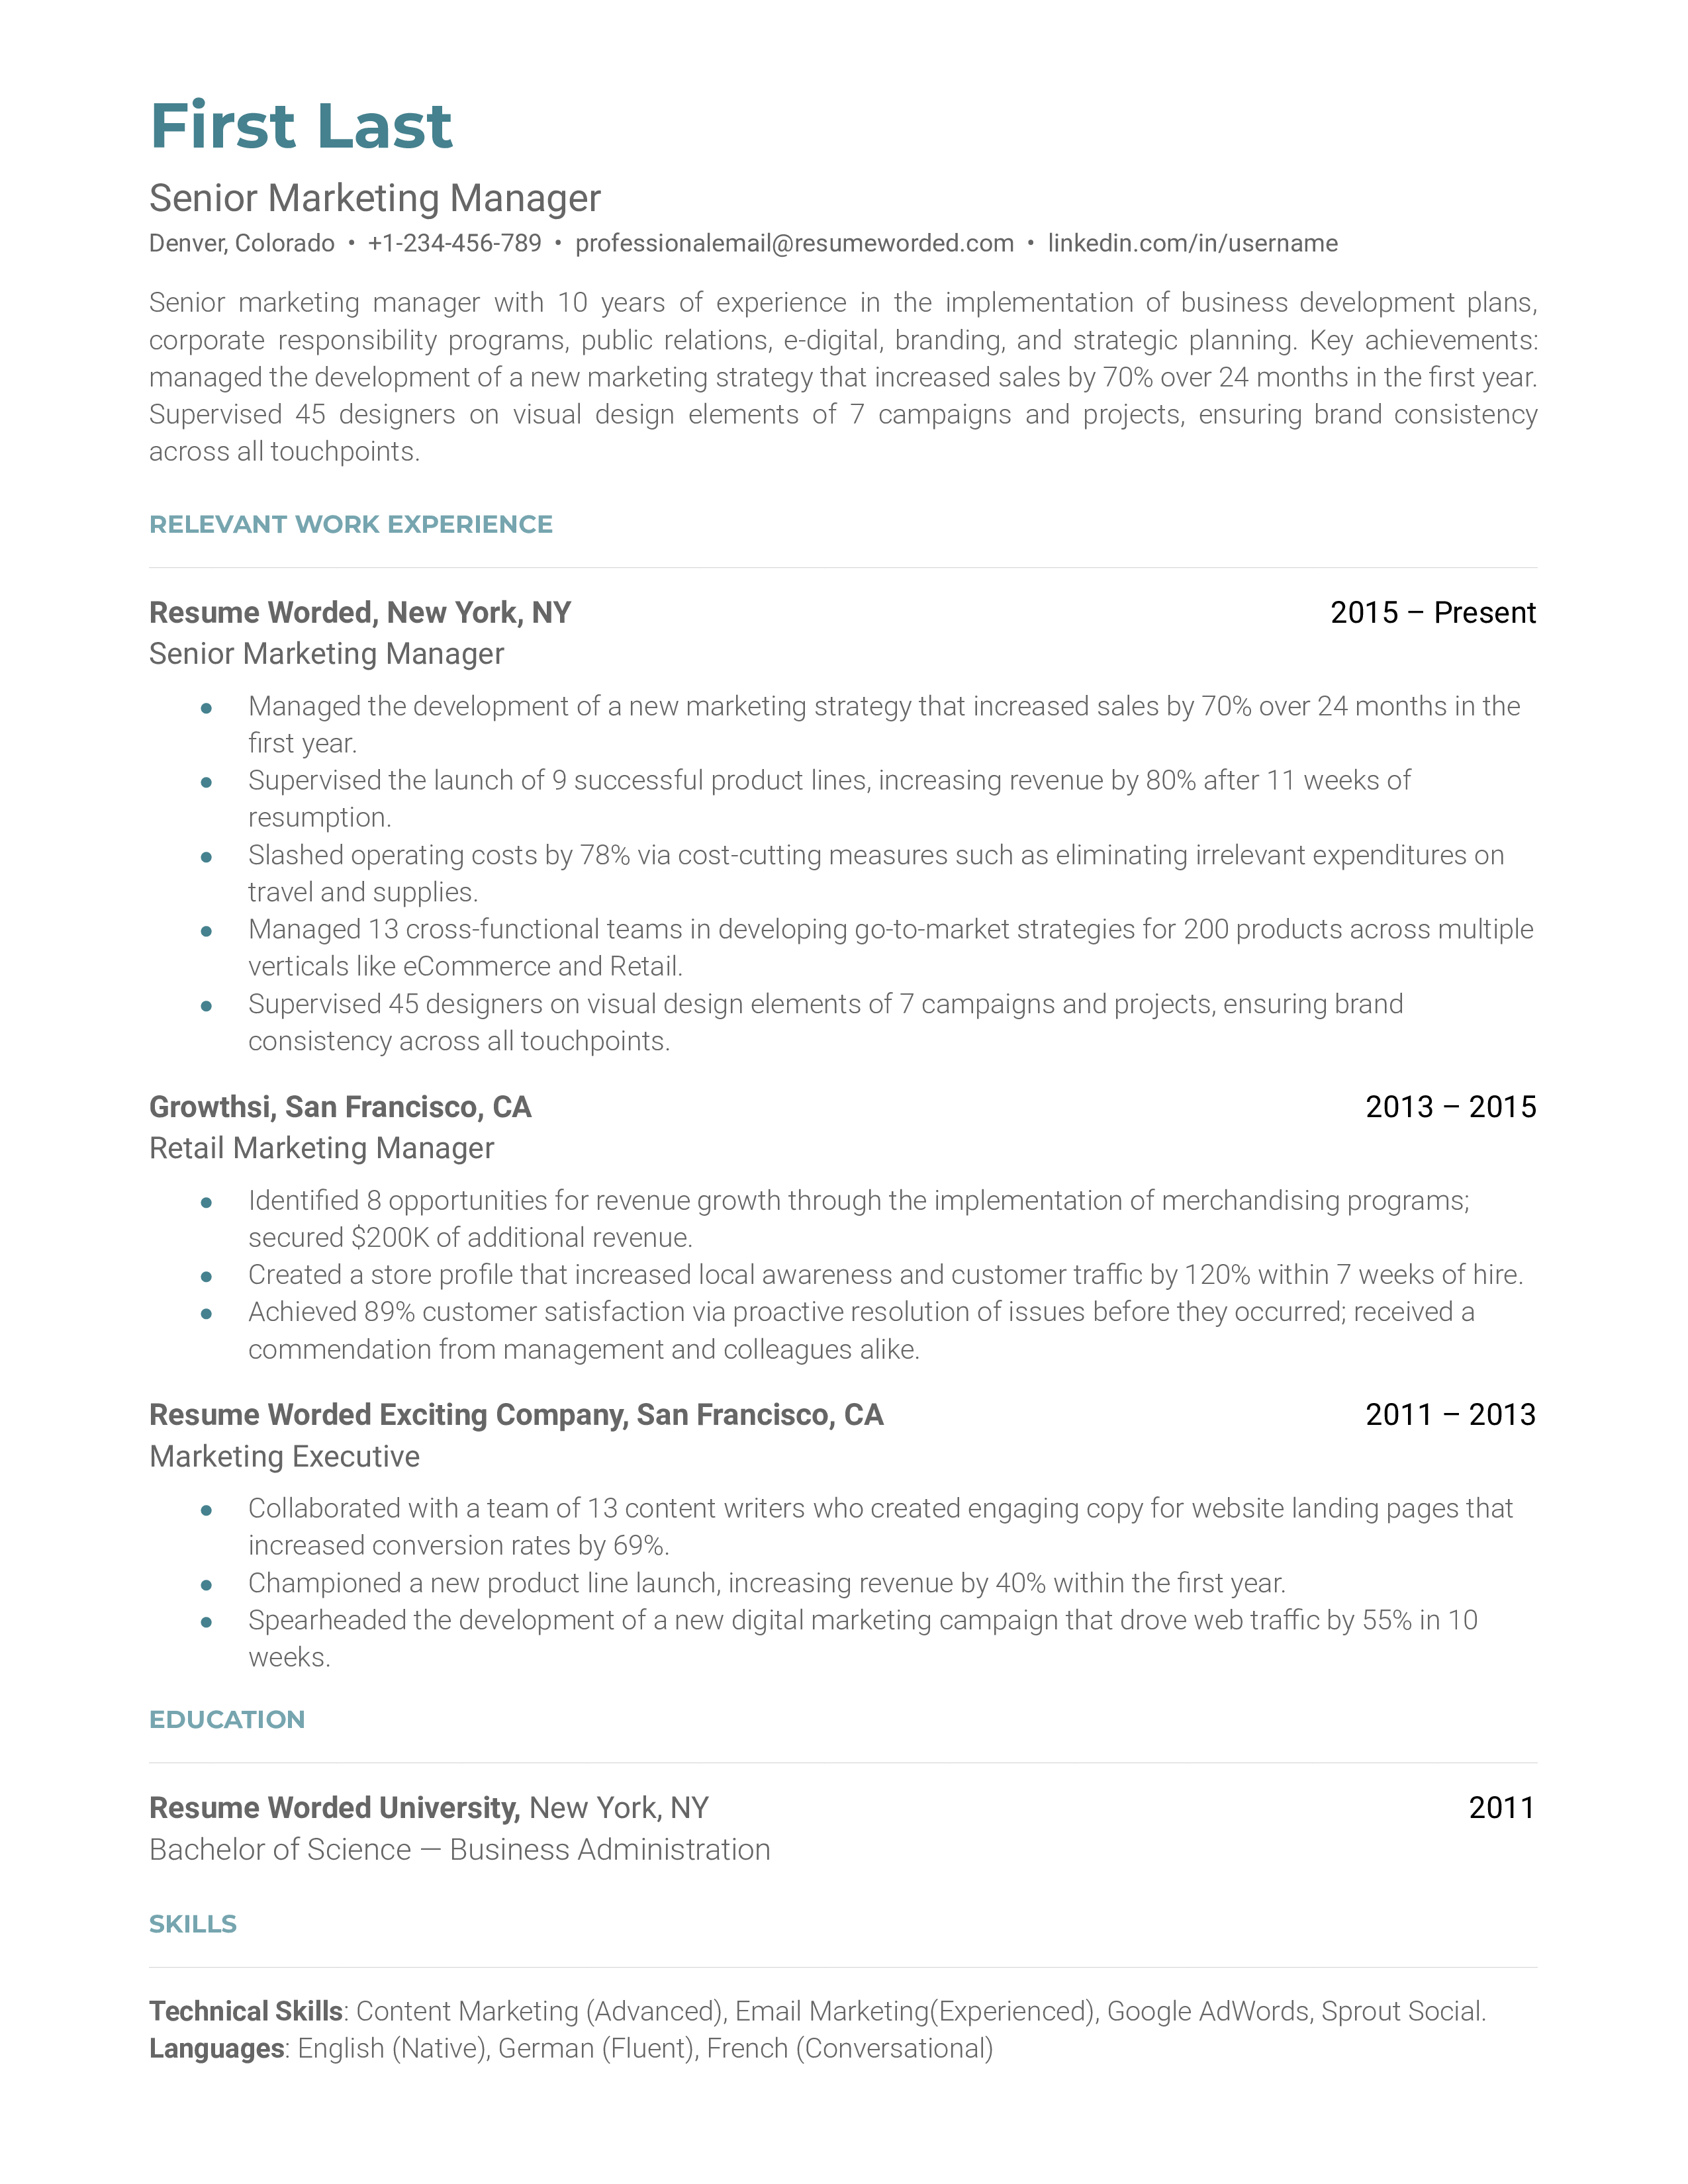 A senior marketing manager resume sample that highlights the applicant’s career growth and technical marketing skills.